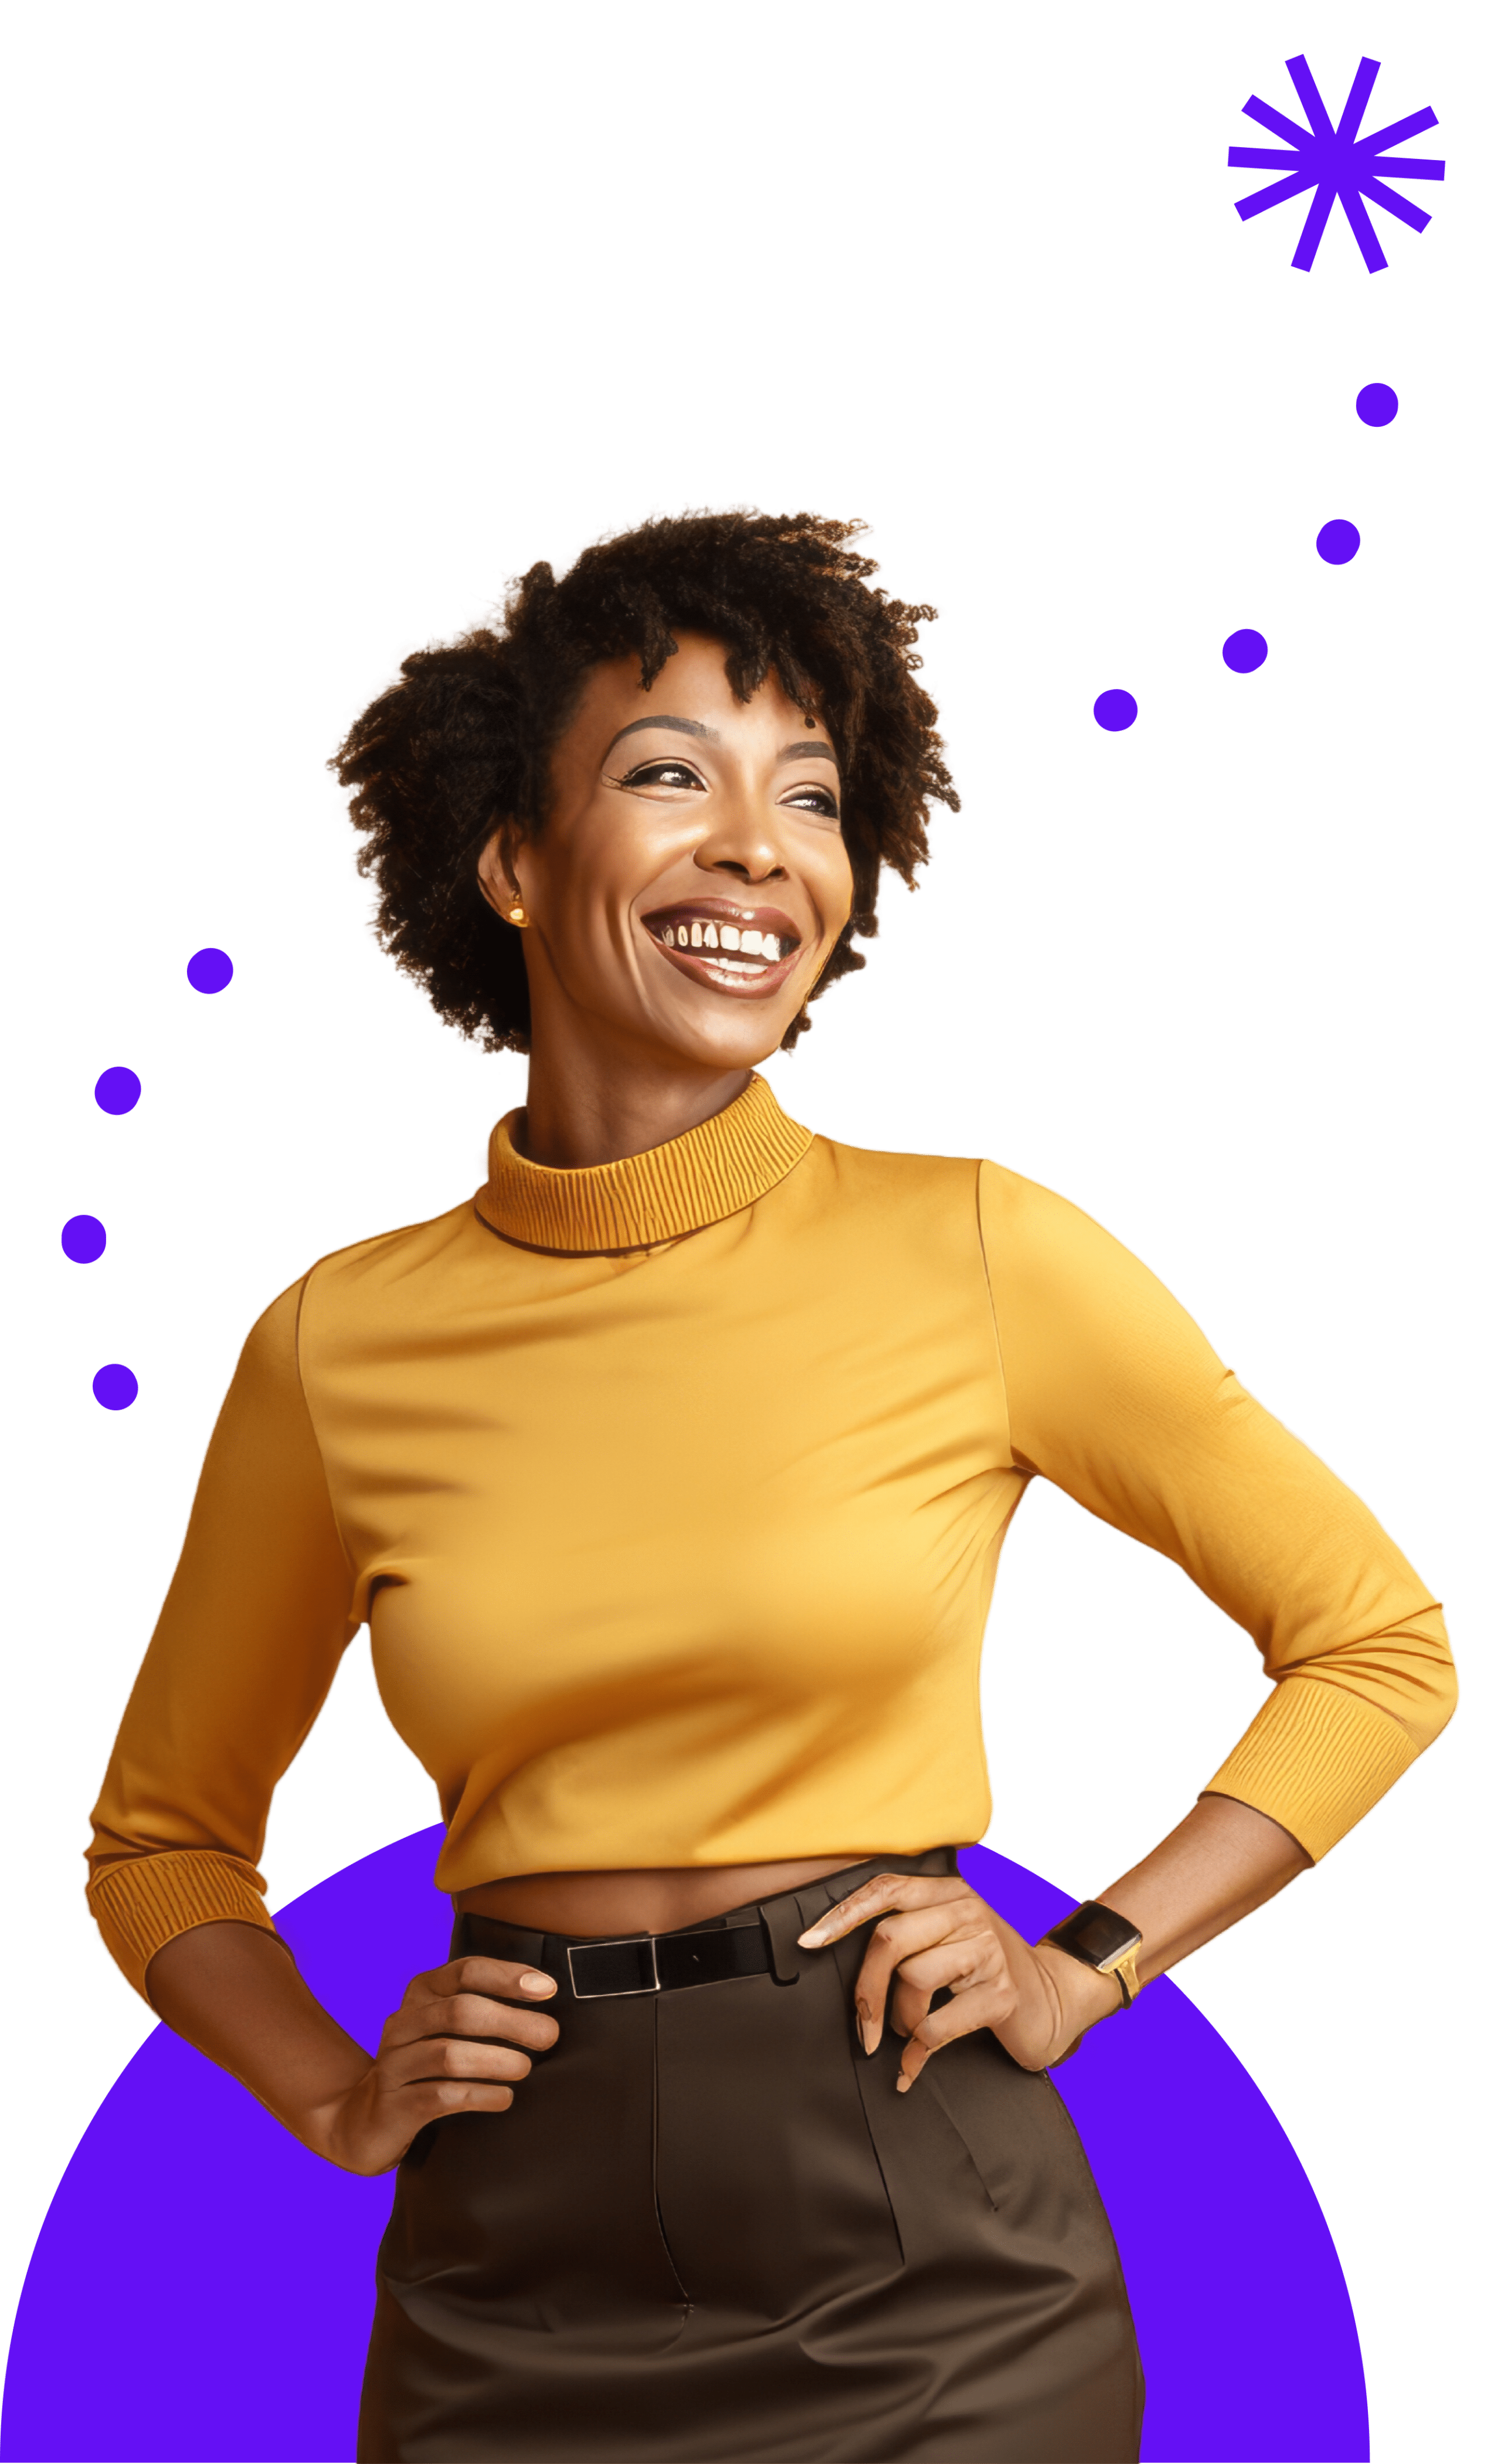 Black woman wearing a yellow top and brown skirt smiling and looking to the right with purple graphics in the background.